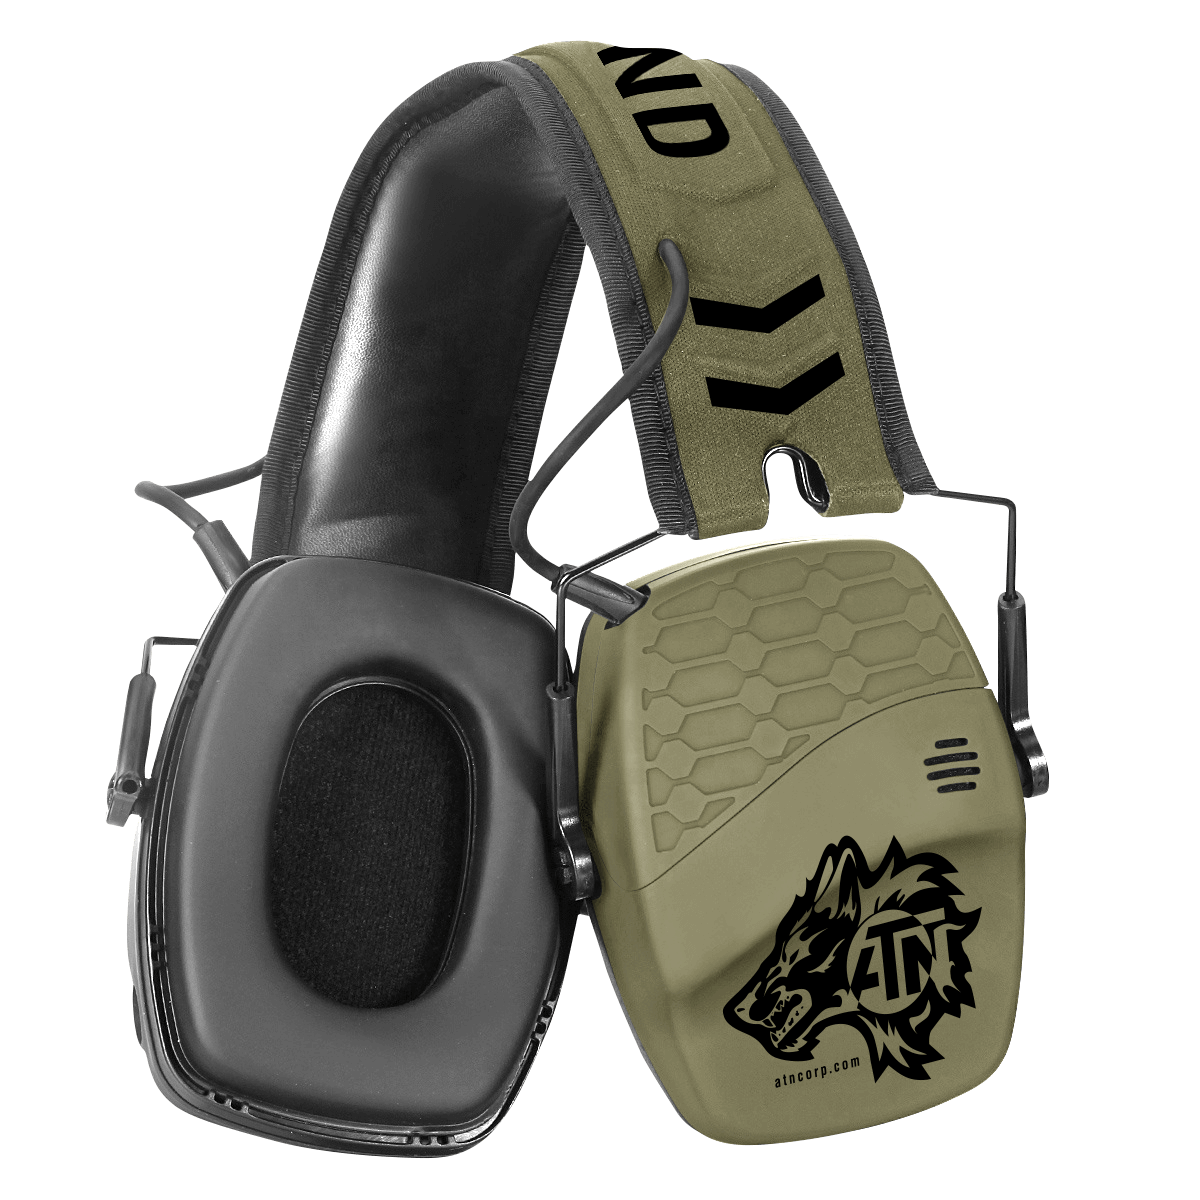 ATN Introduces their New ATN X-Sound Hearing Protection